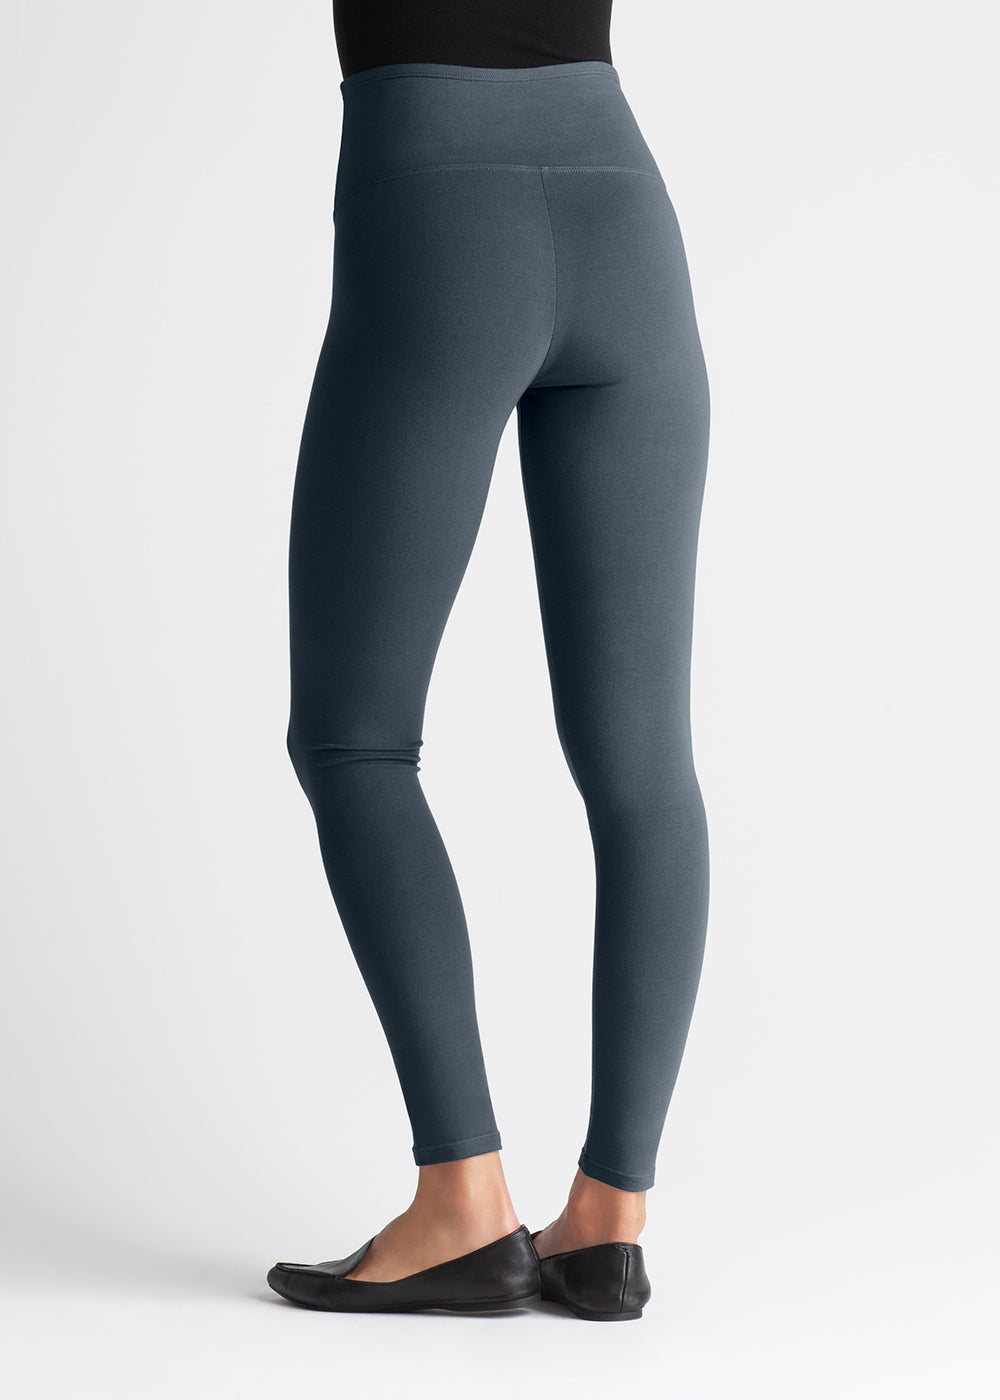 Yummie Rachel Cotton Stretch Shaping Leggings, Black, Size S, from Soma